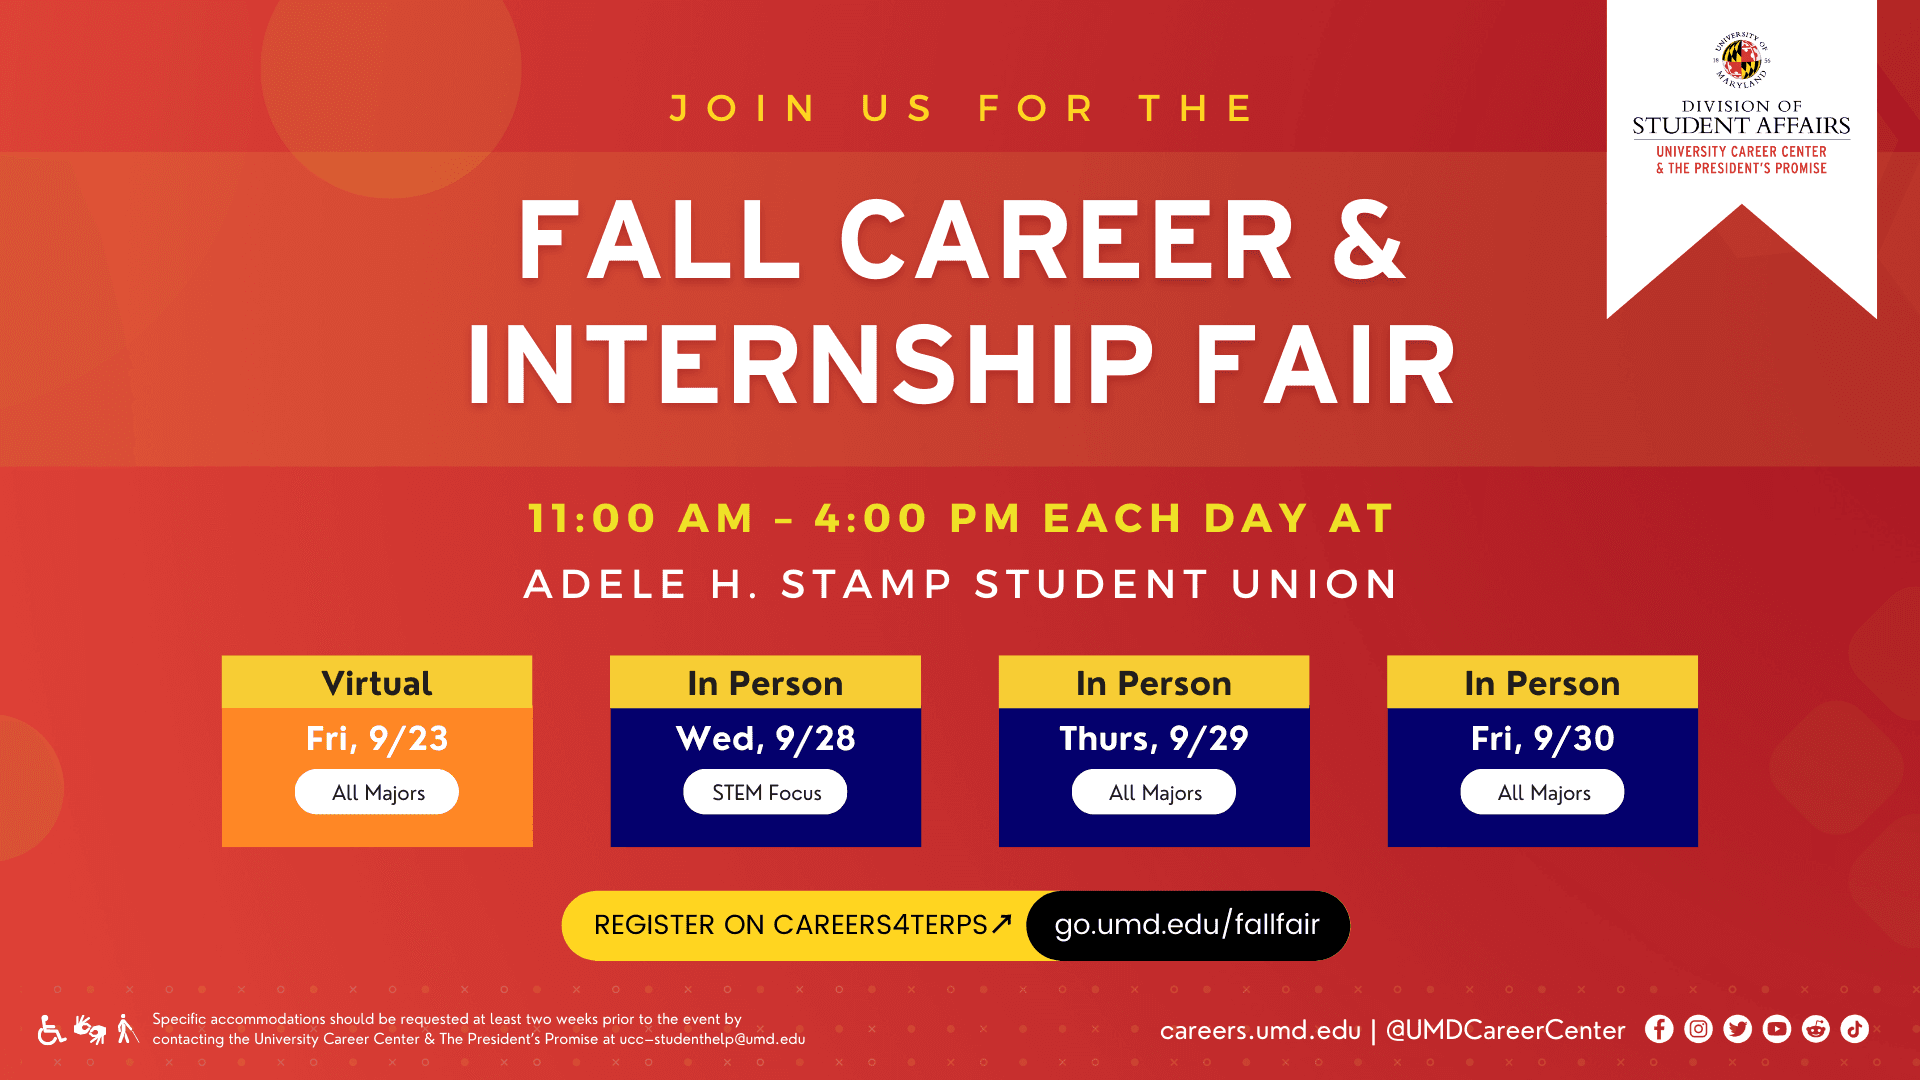 A promotional image for the University Career Center's Fall Career and Internship Fair. The image includes dates and times for the event, along with which Majors should attend a particular day, as well as website and social media information related to University Career Center. At the top right is the University Career Center logo.